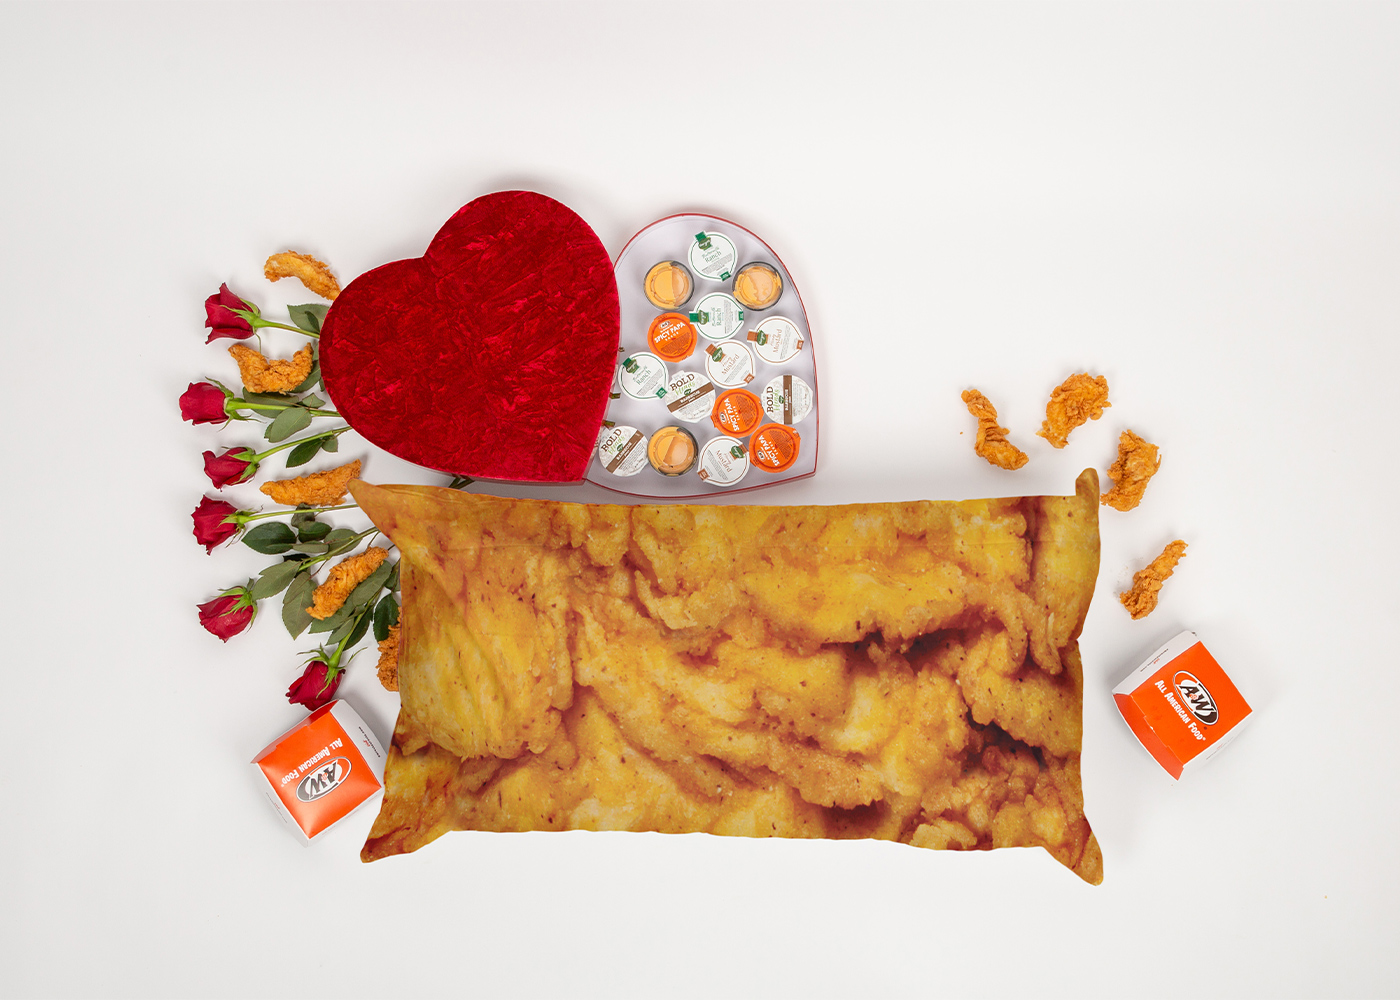 Flat lay photo of a body pillow that looks like an A&W Chicken Tender. The pillow is surrounded by a heart-shaped box filled with A&W sauces and Chicken Tenders.